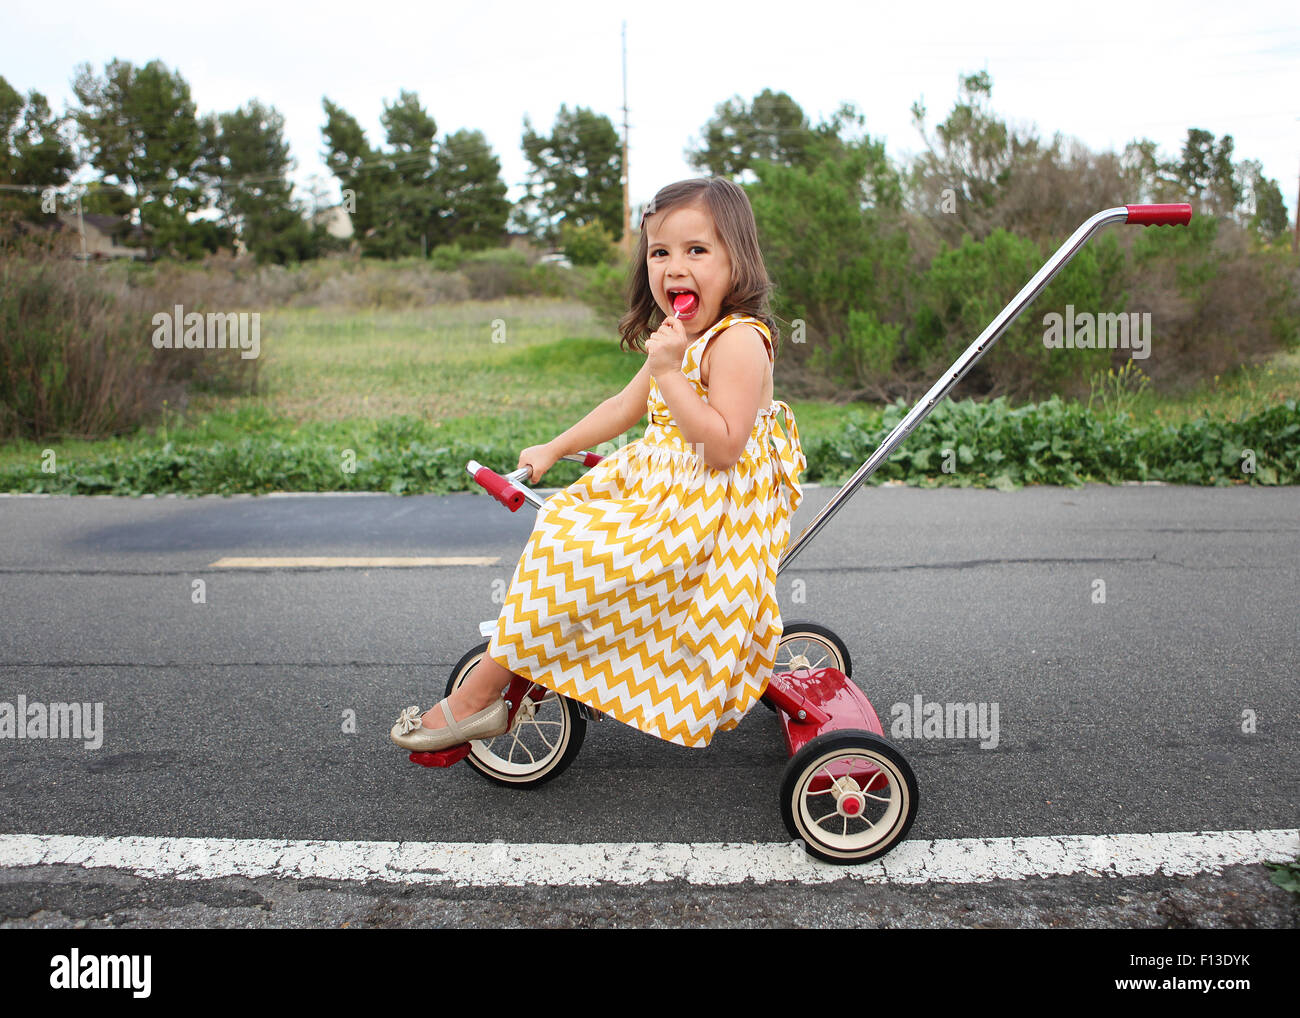 Girl on tricycle eating lollipop Stock Photo